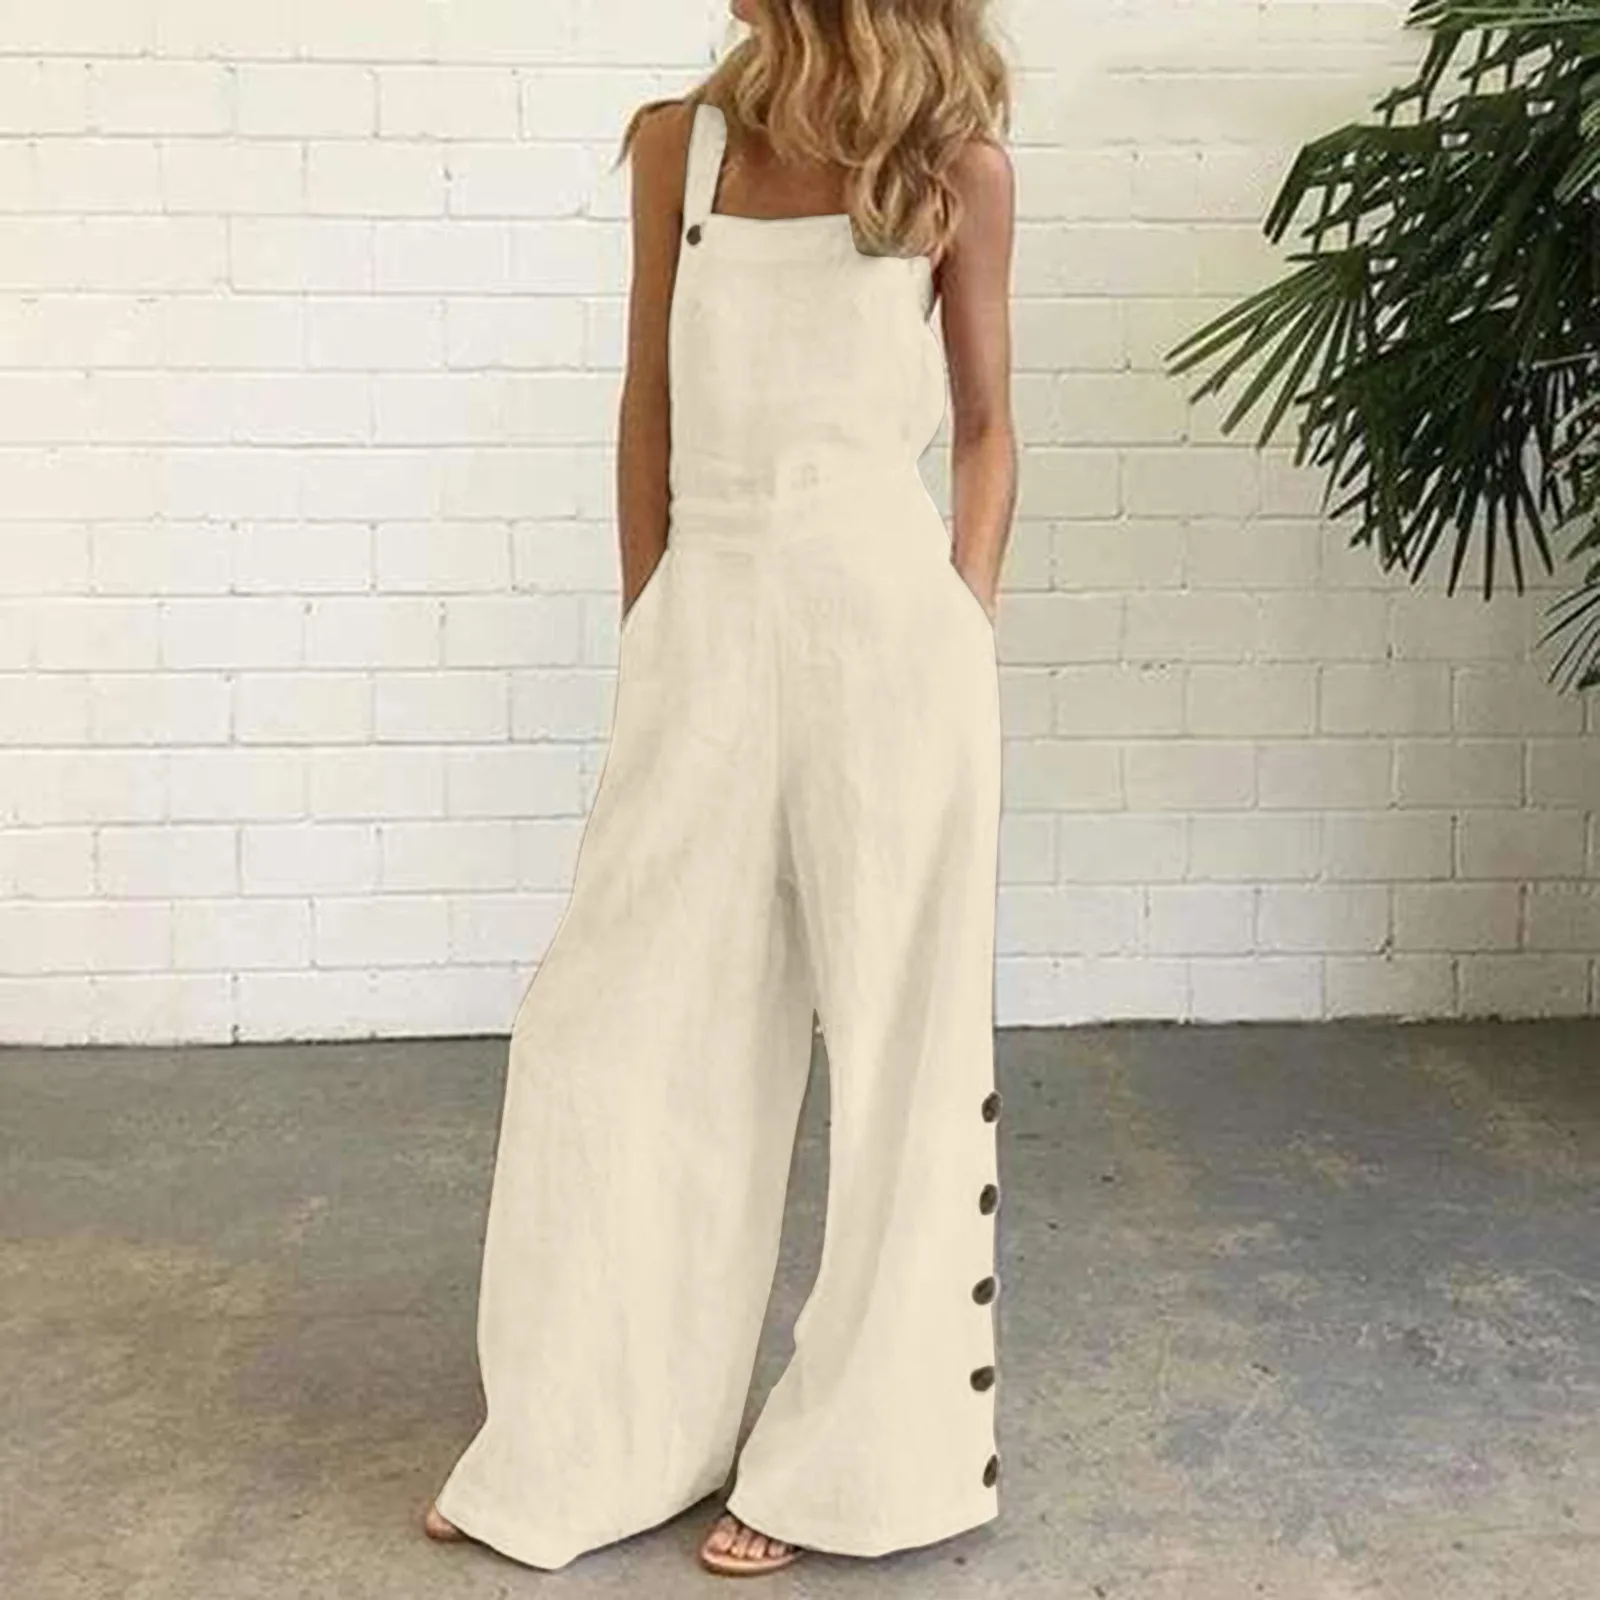 

Women's Summer Sleeveless Twisted Knot Cotton Linen Strappy Pants Side Button Openings Loose Long Wide Leg Pants Women Jumpsuits